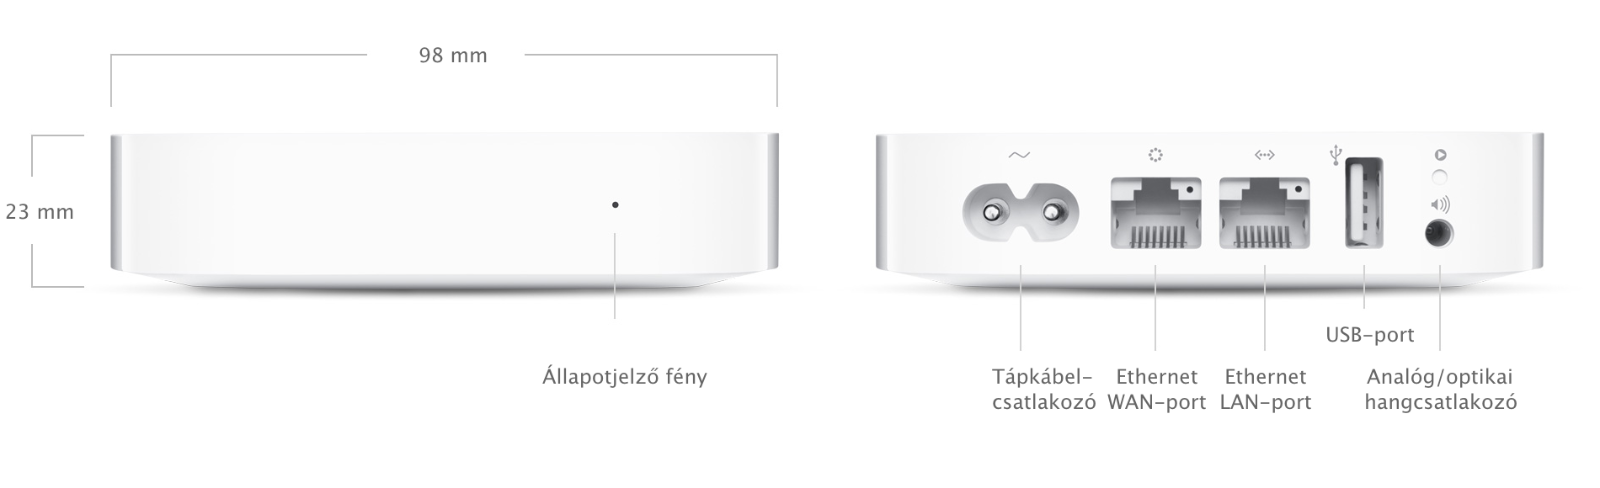 AirPort Express 802.11n (2nd Generation) 